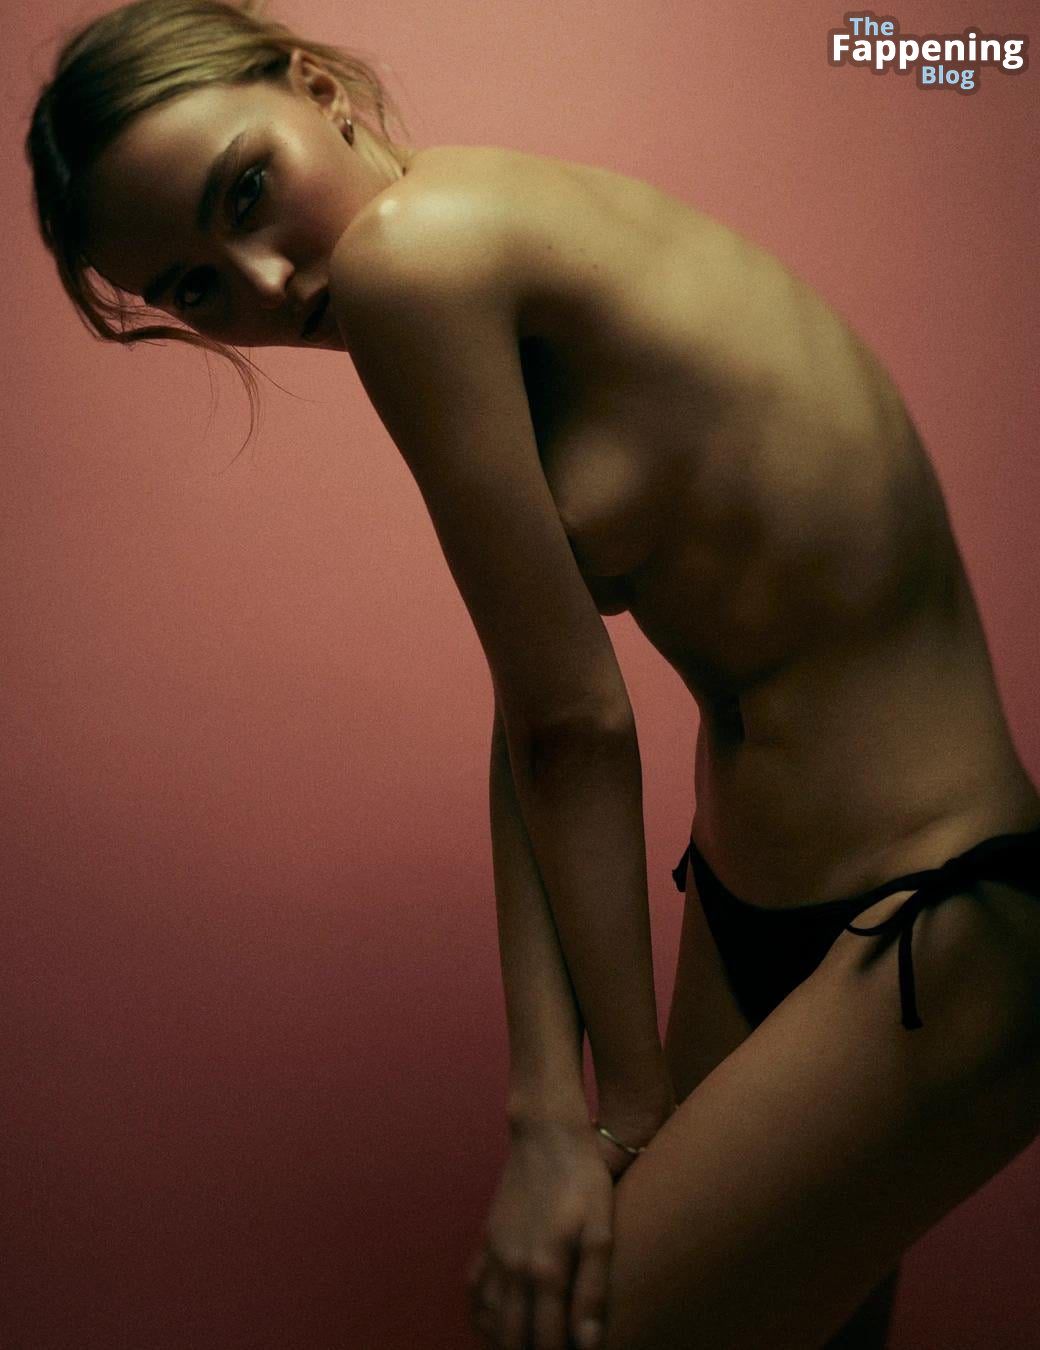 Lily-Rose-Depp-Nude-Sexy-i-D-Magazine-The-Fappening-Blog-12.jpg